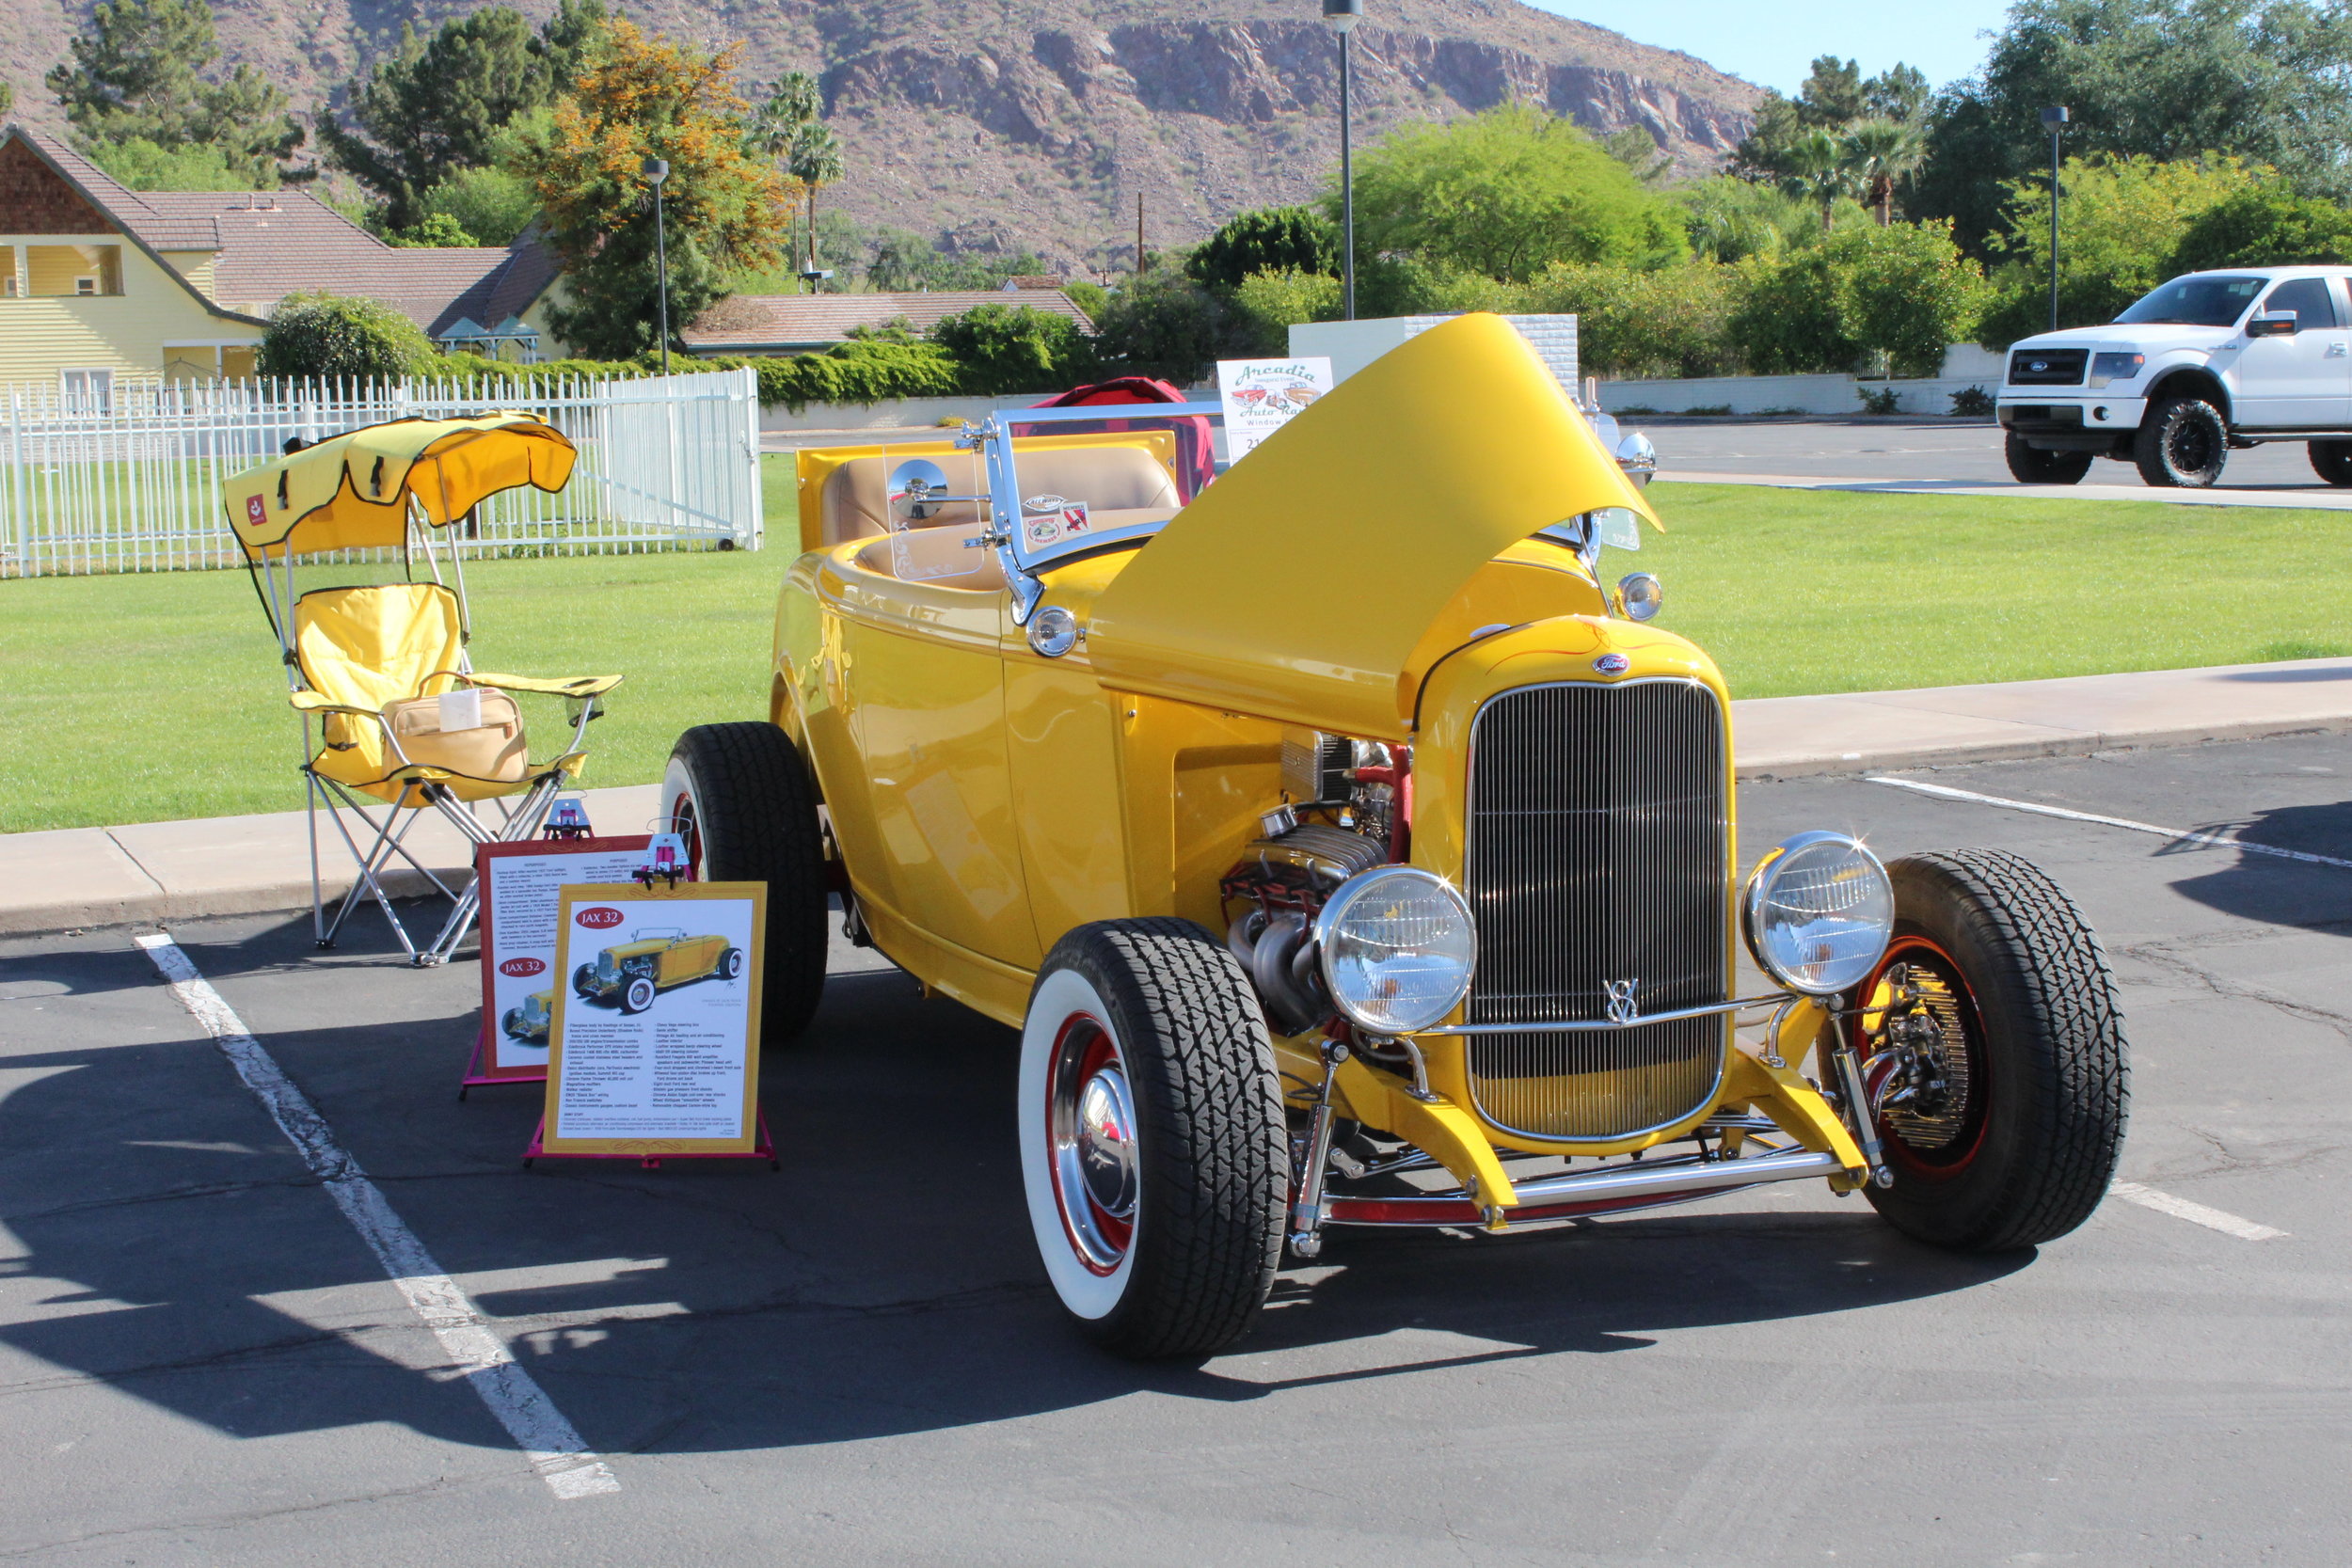 Best in Arcadia - a 1932 roadster hot-rod. Owned by Jack Nock